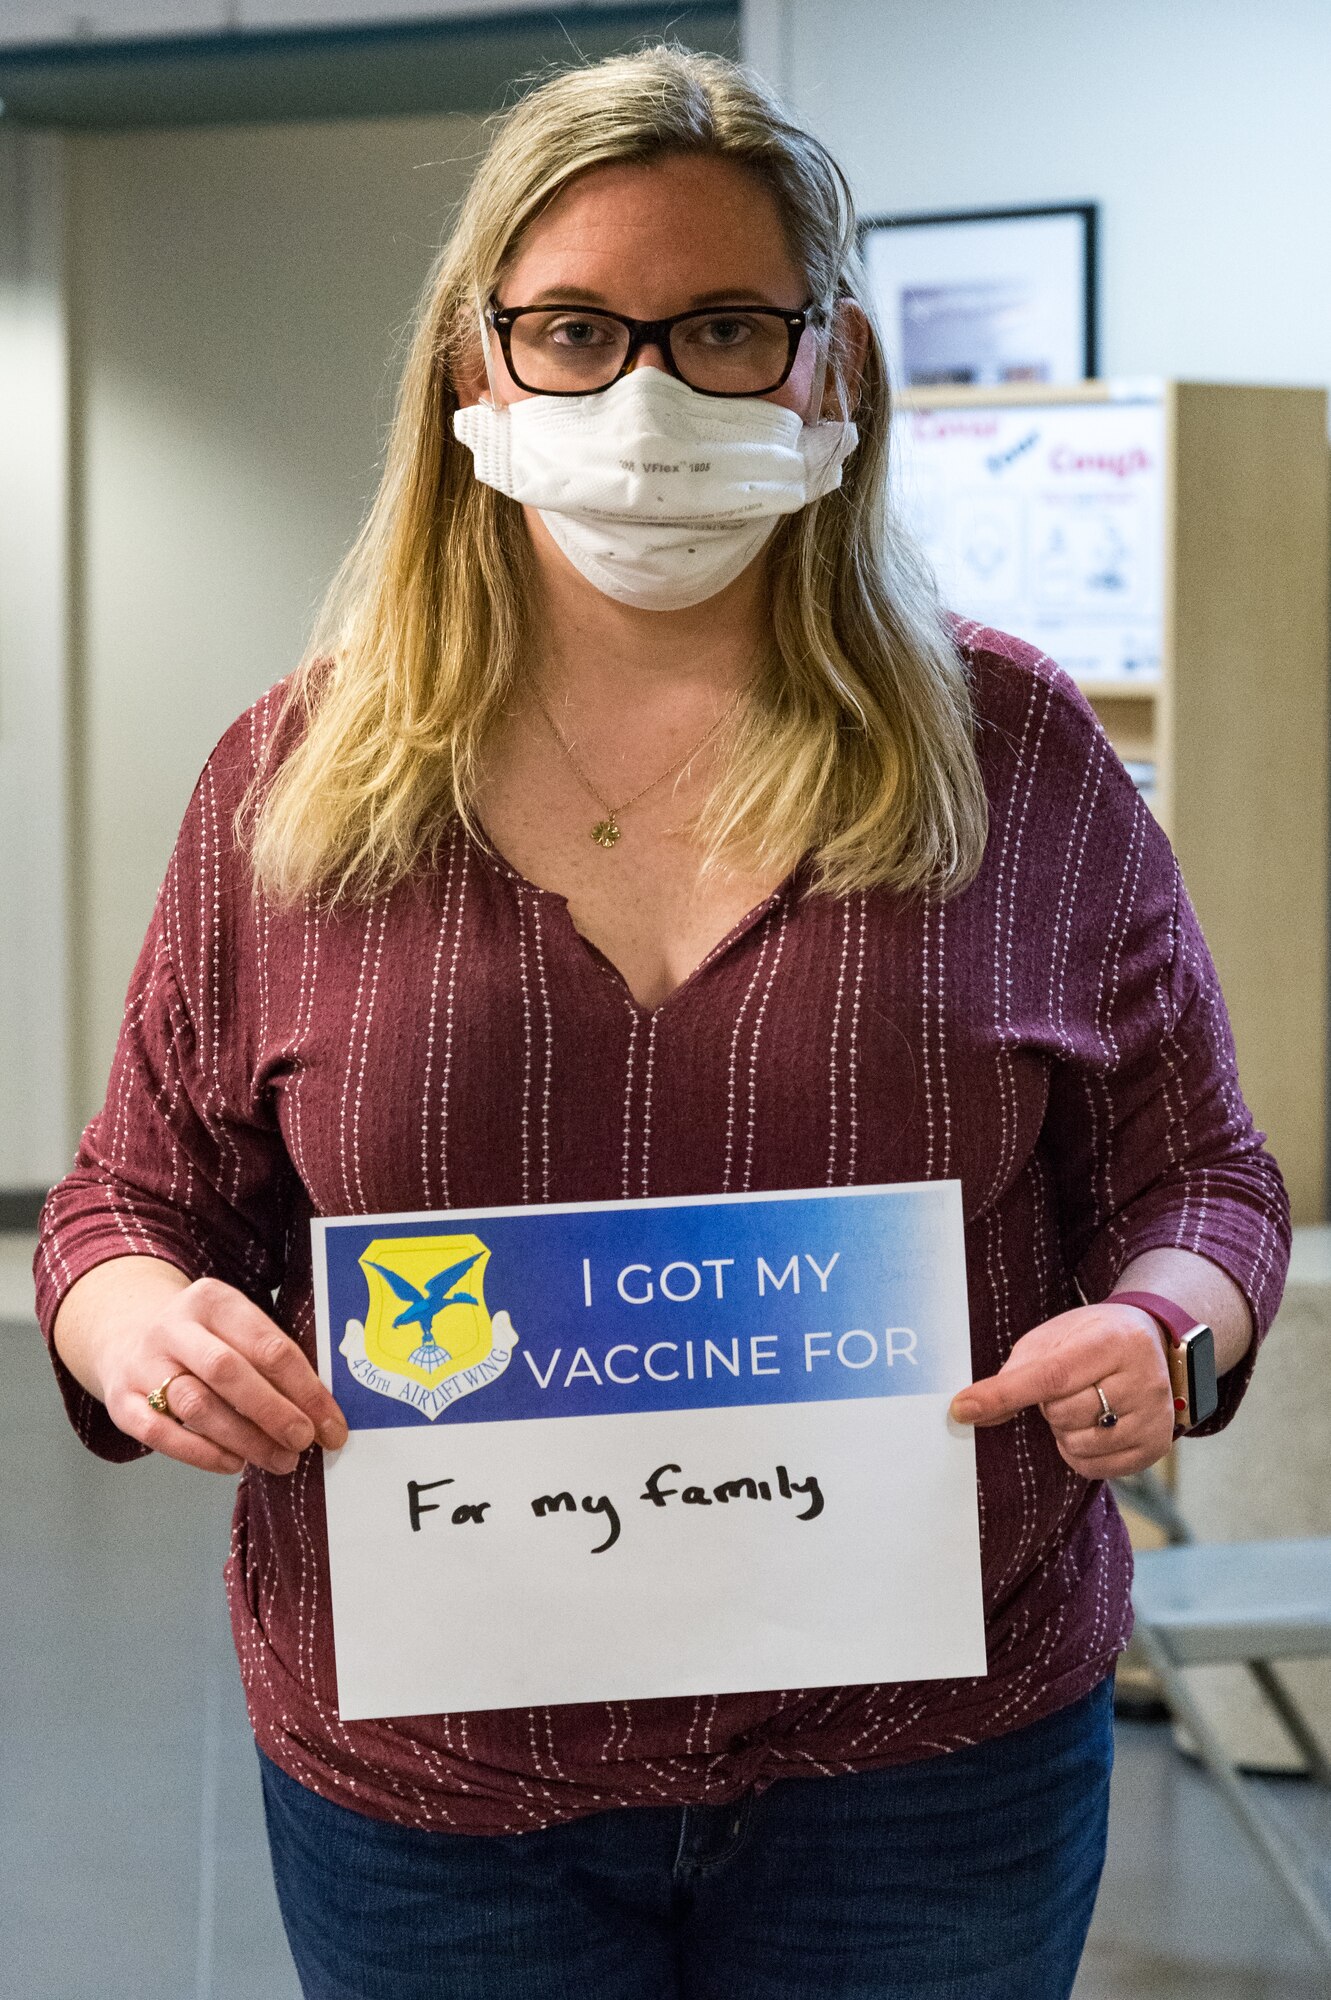 Kathleen McBride, 436th Operational Medical Readiness Squadron aerospace technician, displays a sign stating why she volunteered for the COVID-19 vaccine on Jan. 21, 2021, at Dover Air Force Base, Delaware. McBride was among the first Team Dover front-line workers who voluntarily received the vaccine in accordance with Department of Defense guidance. The vaccine was granted emergency use authorization by the U.S. Food and Drug Administration for use in prevention of COVID-19. (U.S. Air Force photo by Roland Balik)